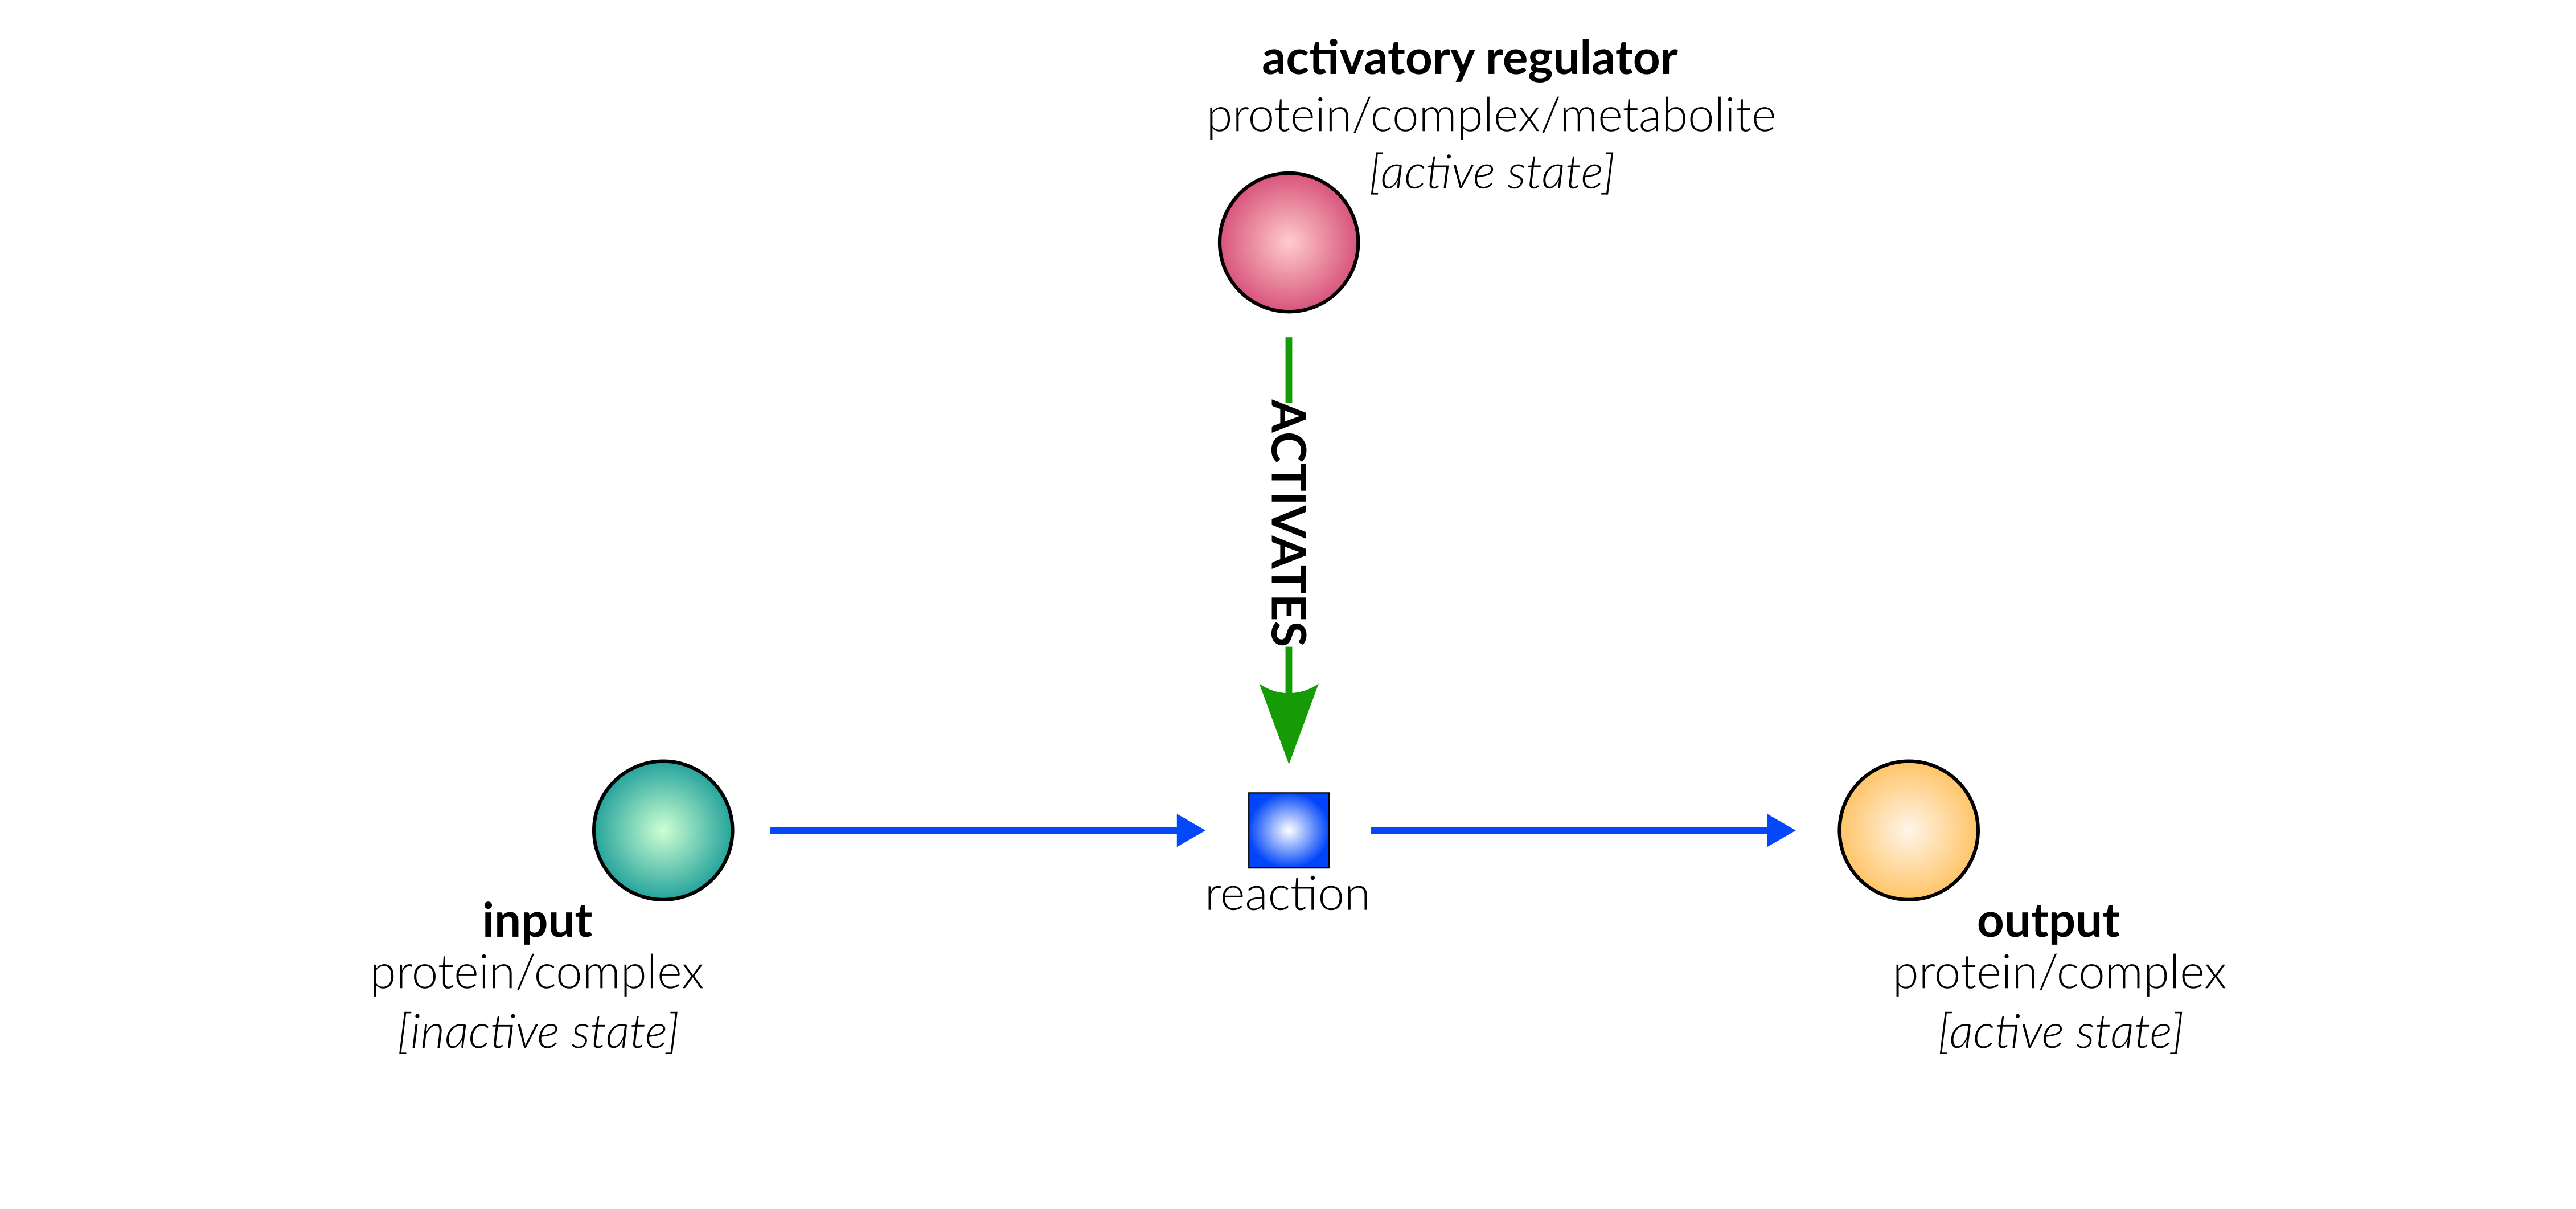 protein activation reaction layout in database schematic